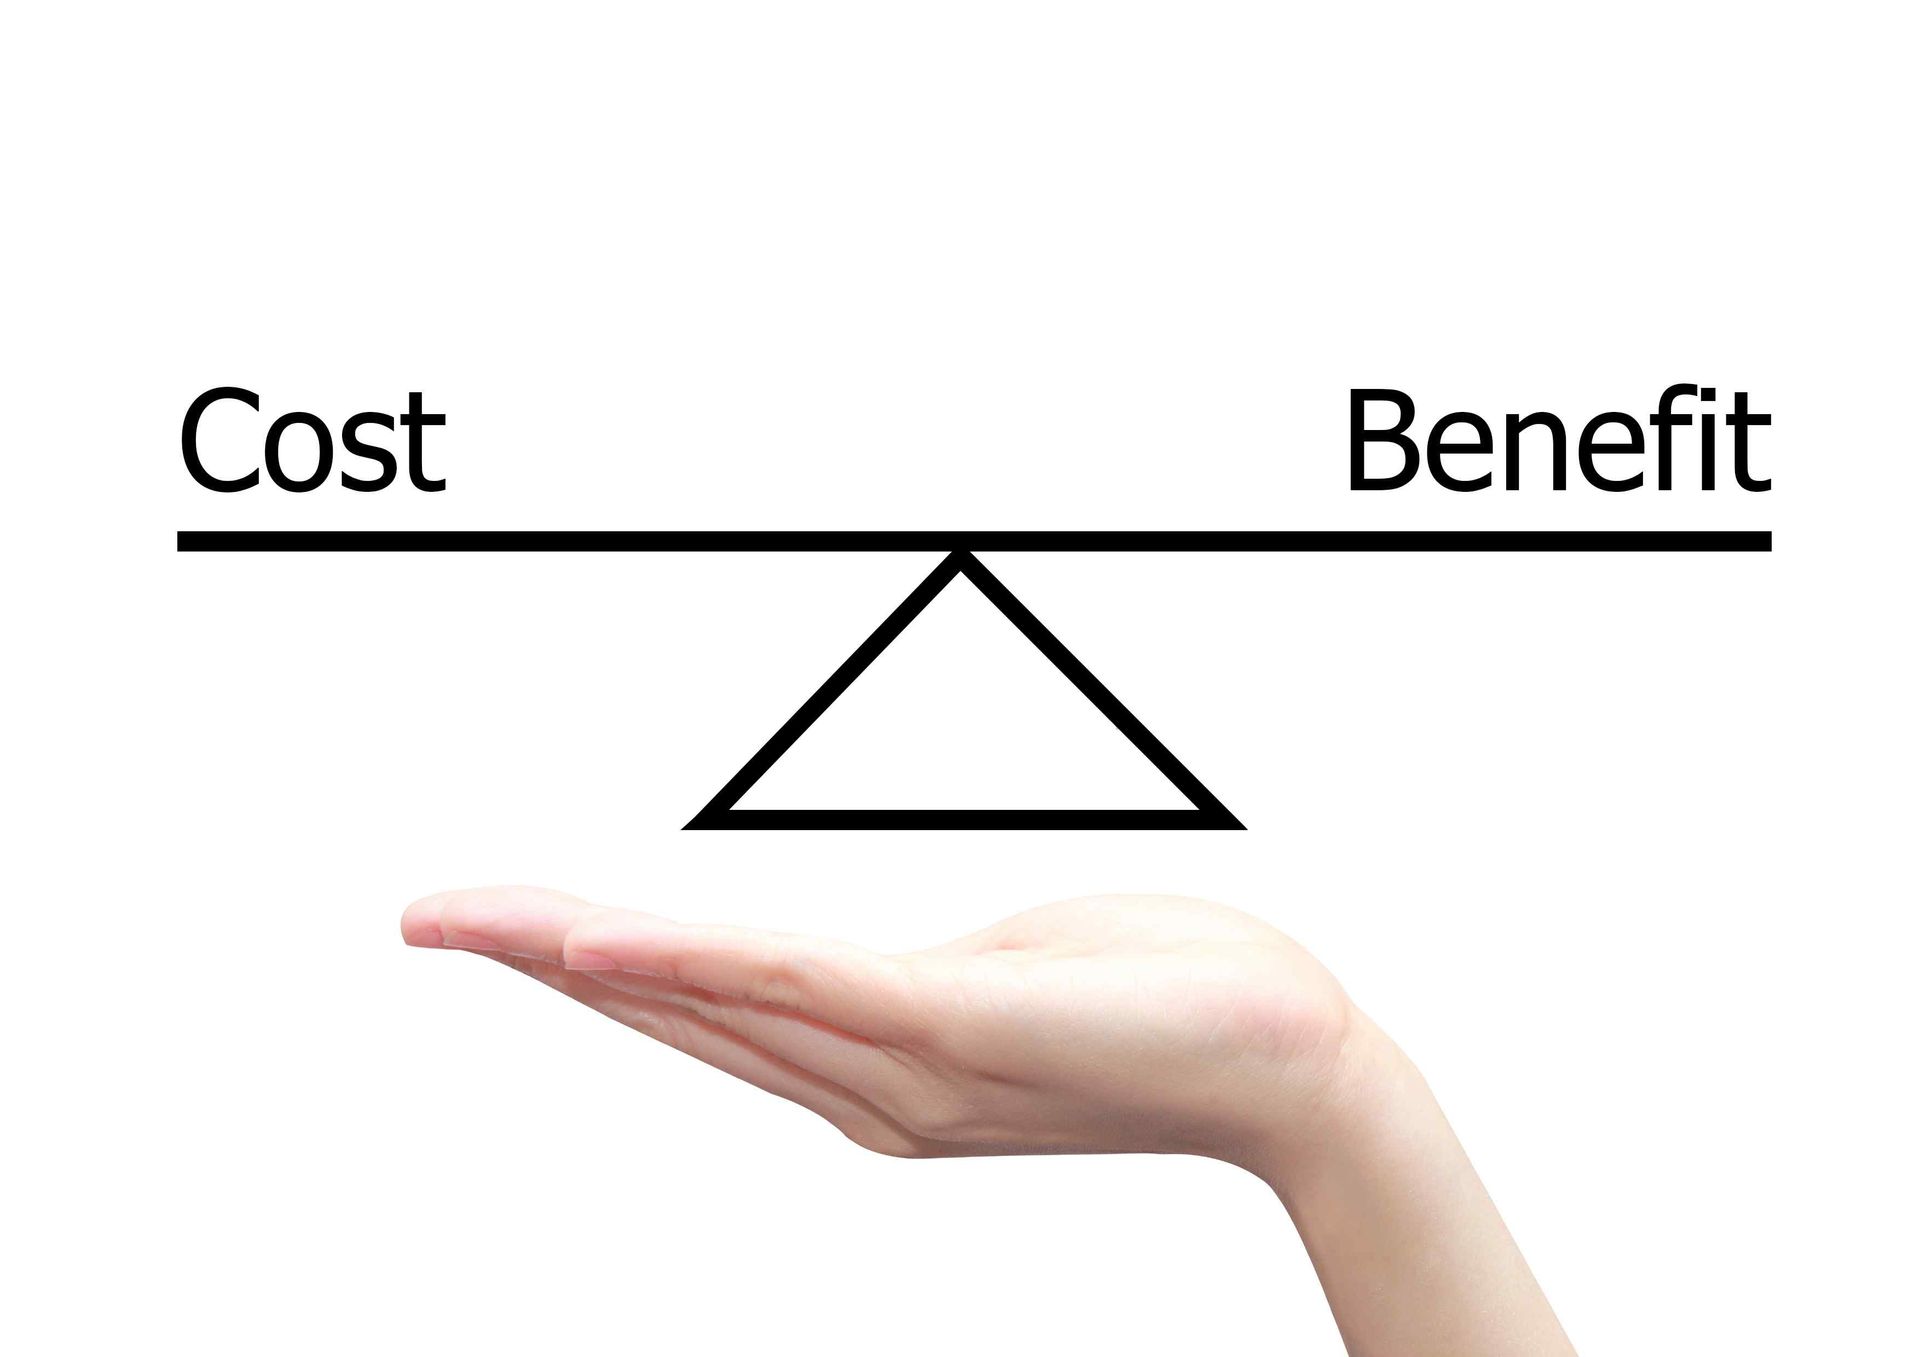 Cost vs benefit scale in the palm of someone's hand